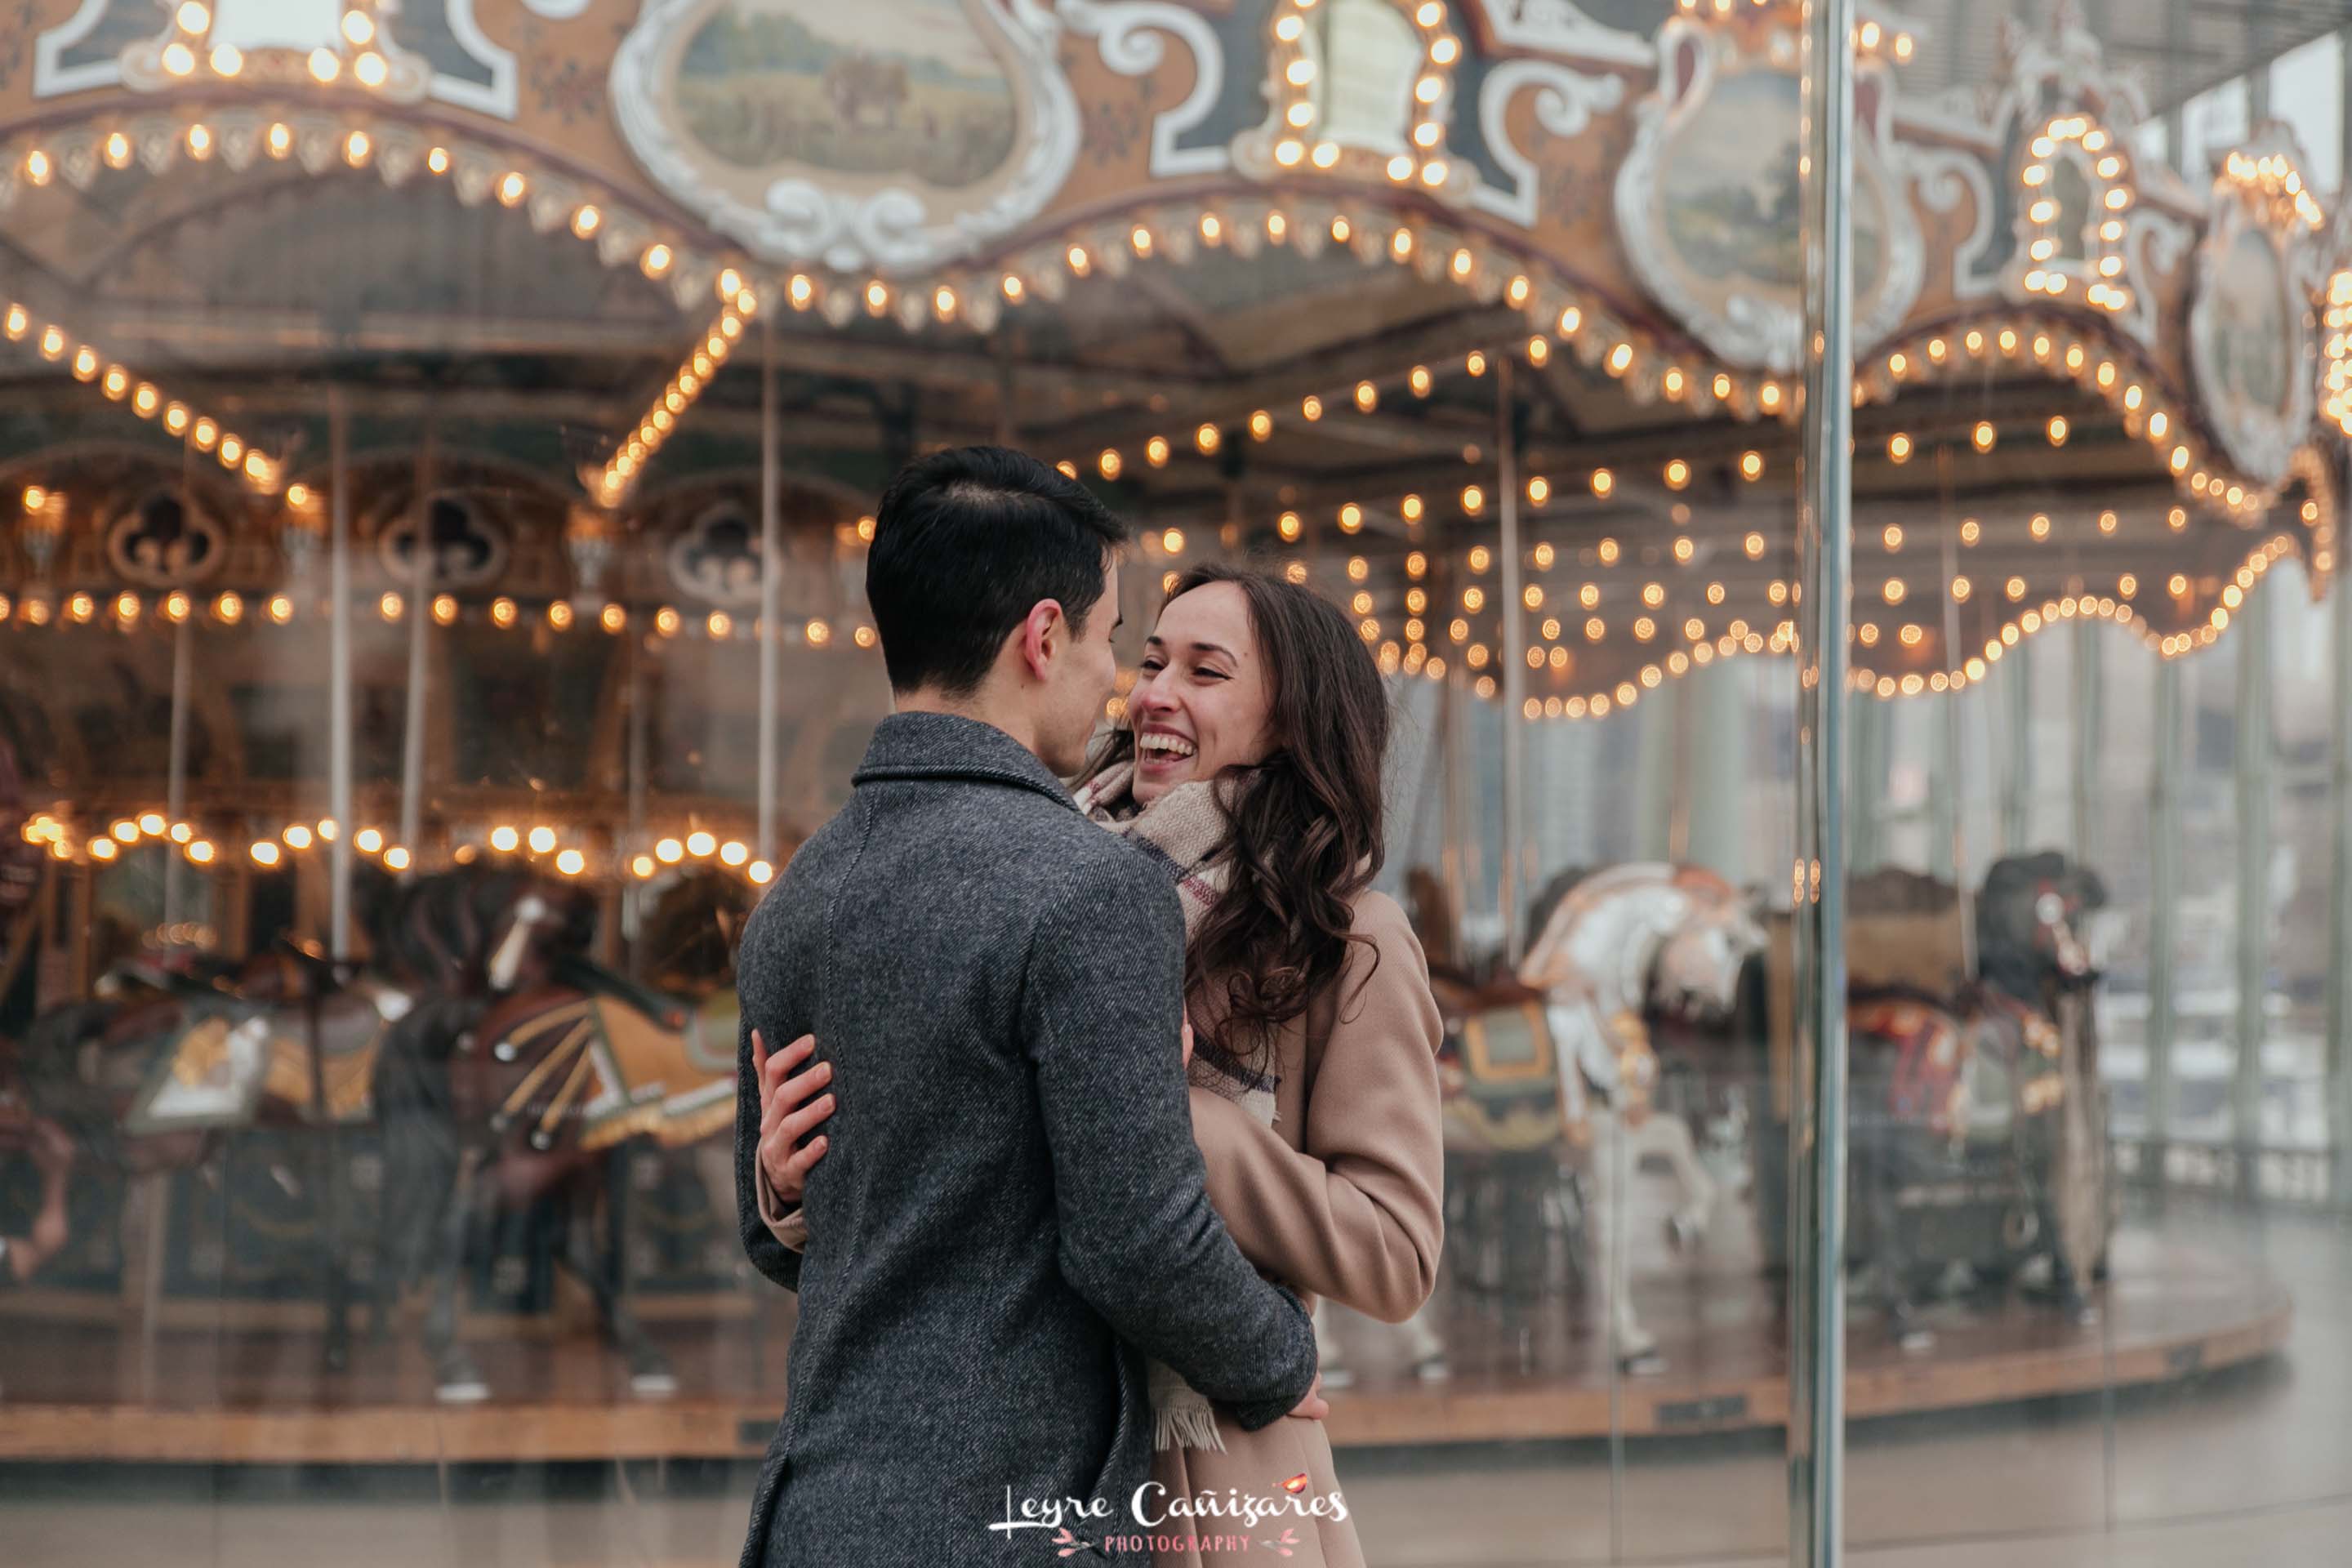 engagement photoshoot in nyc by Leyre